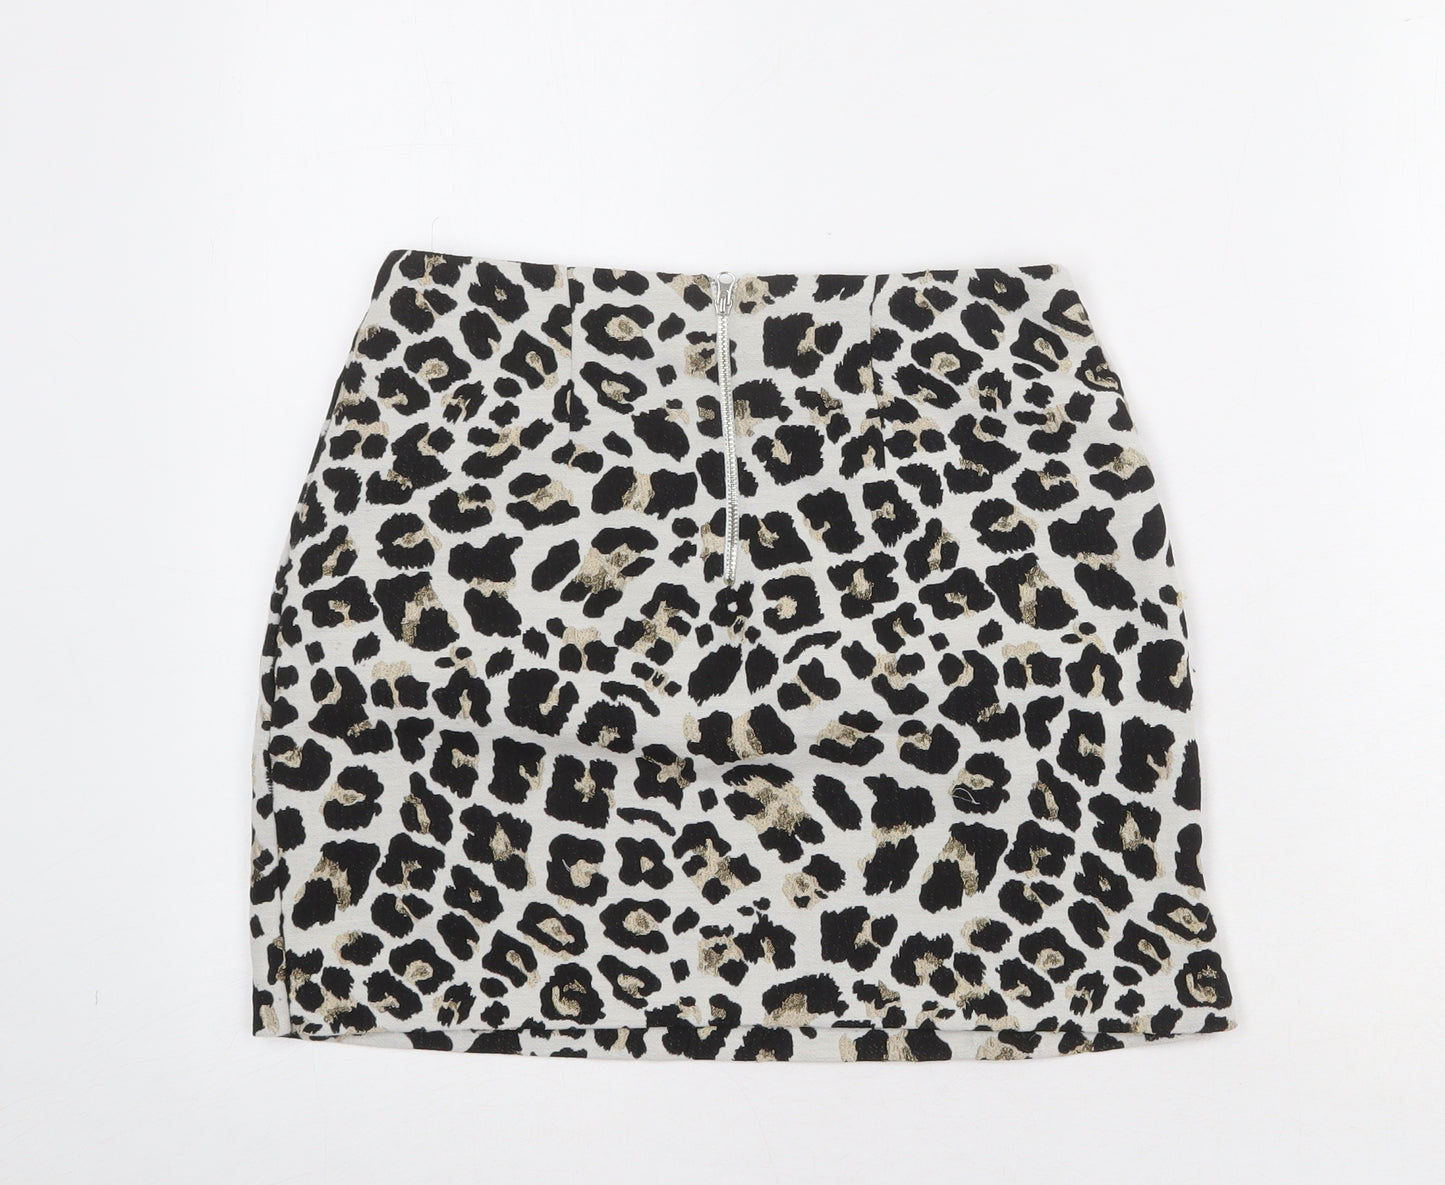 New Look Womens Grey Animal Print Polyester A-Line Skirt Size 8 Zip - Leopard pattern